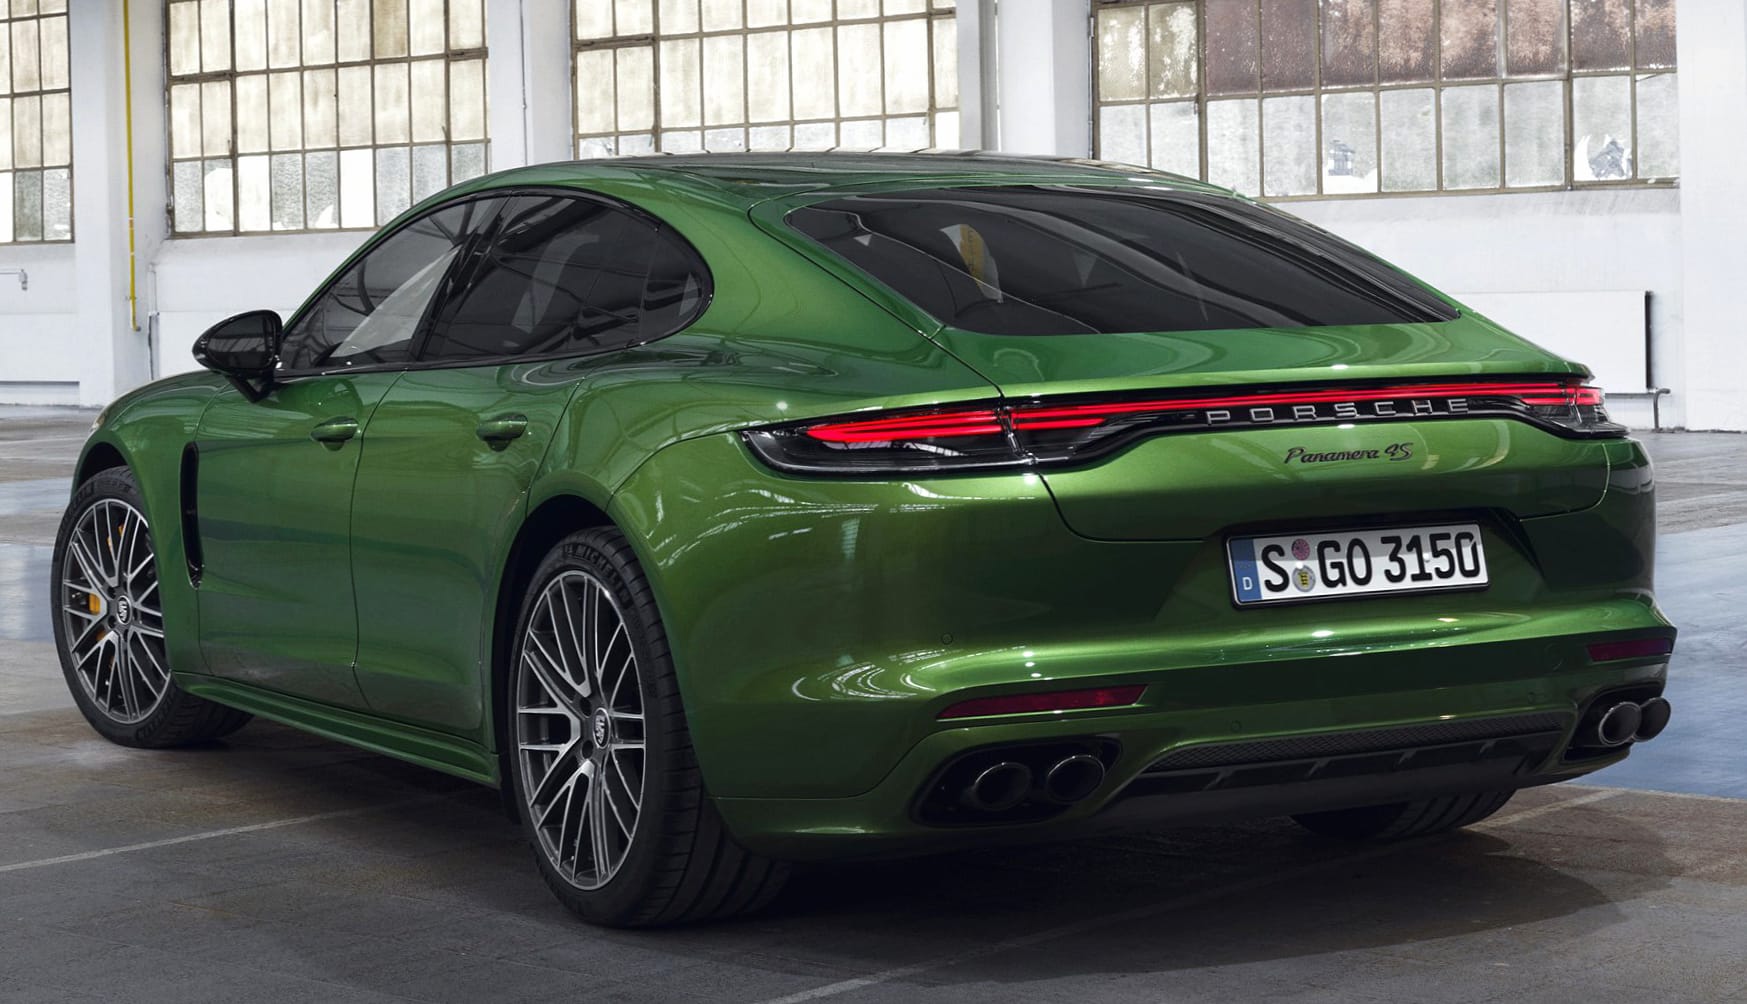 Porsche Panamera 4S SportDesign Package wallpapers HD quality